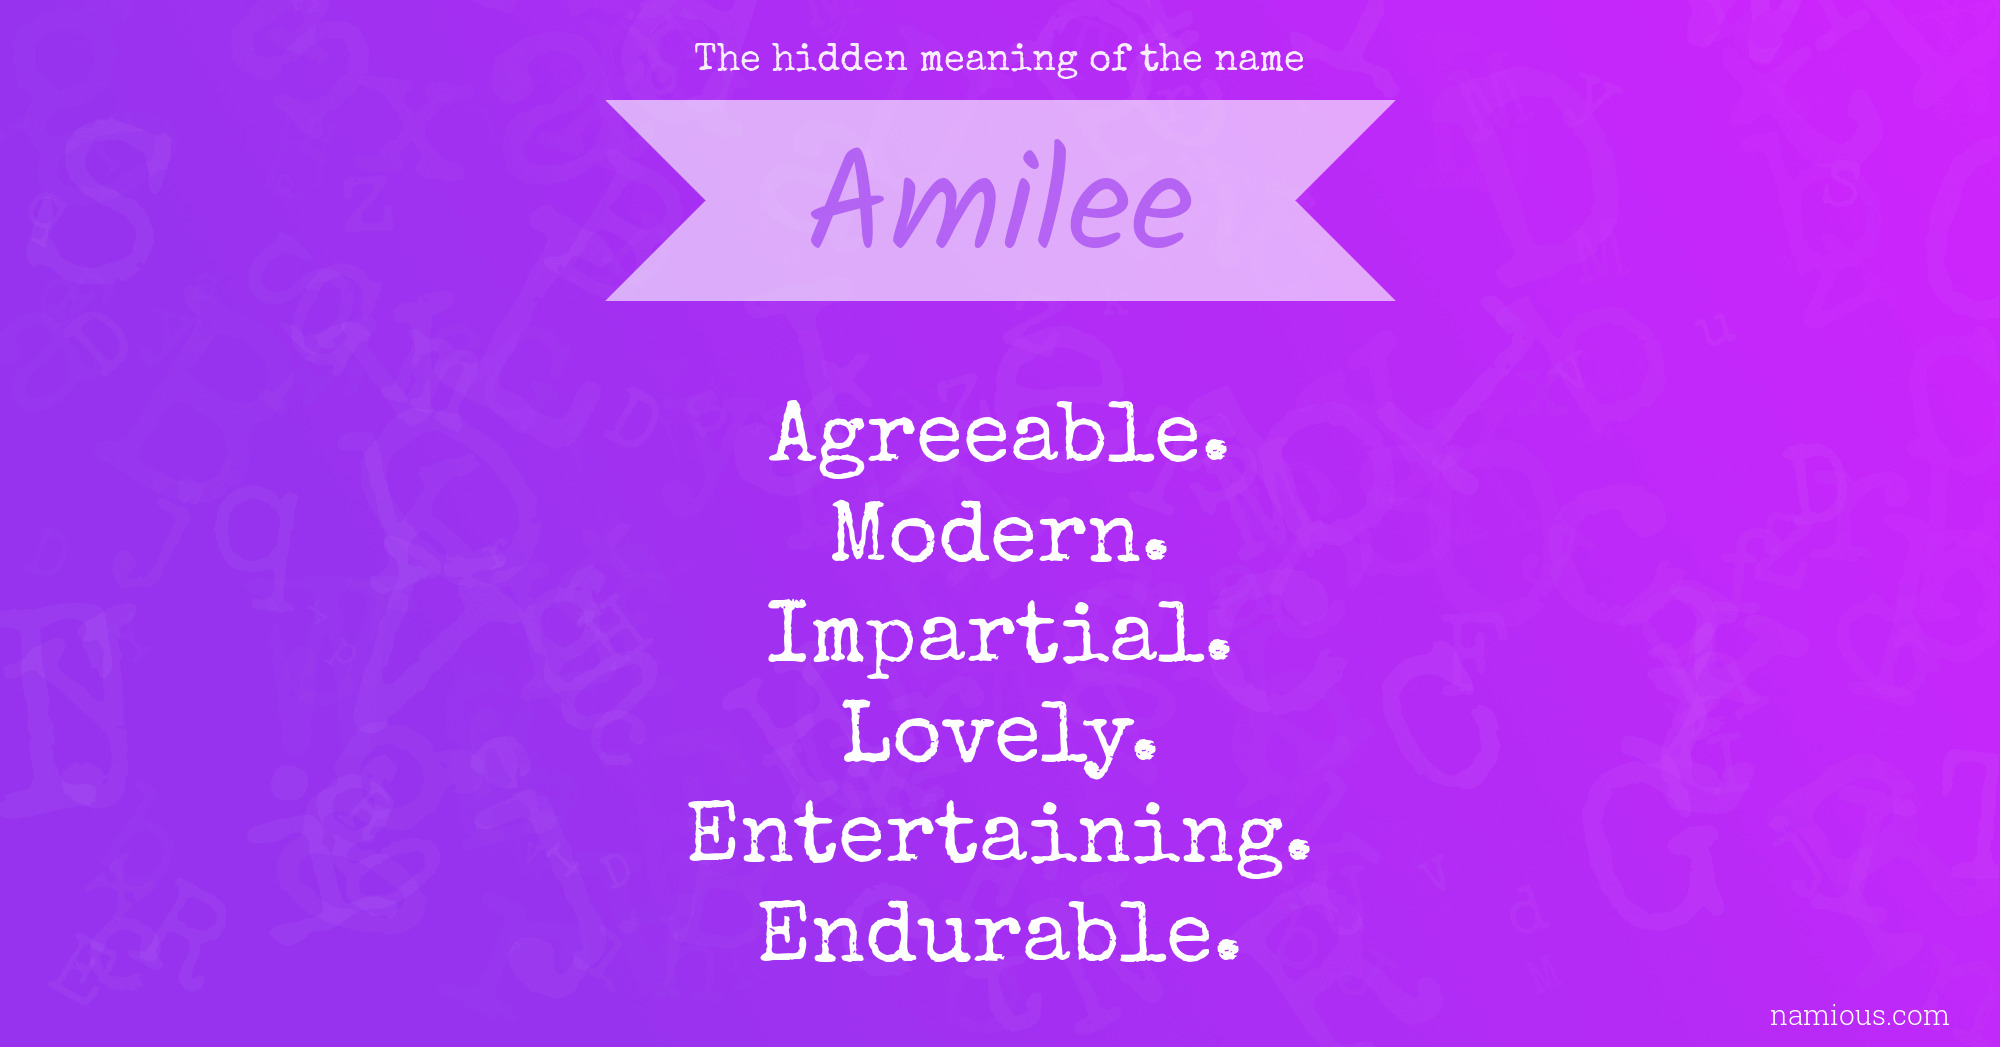 The hidden meaning of the name Amilee